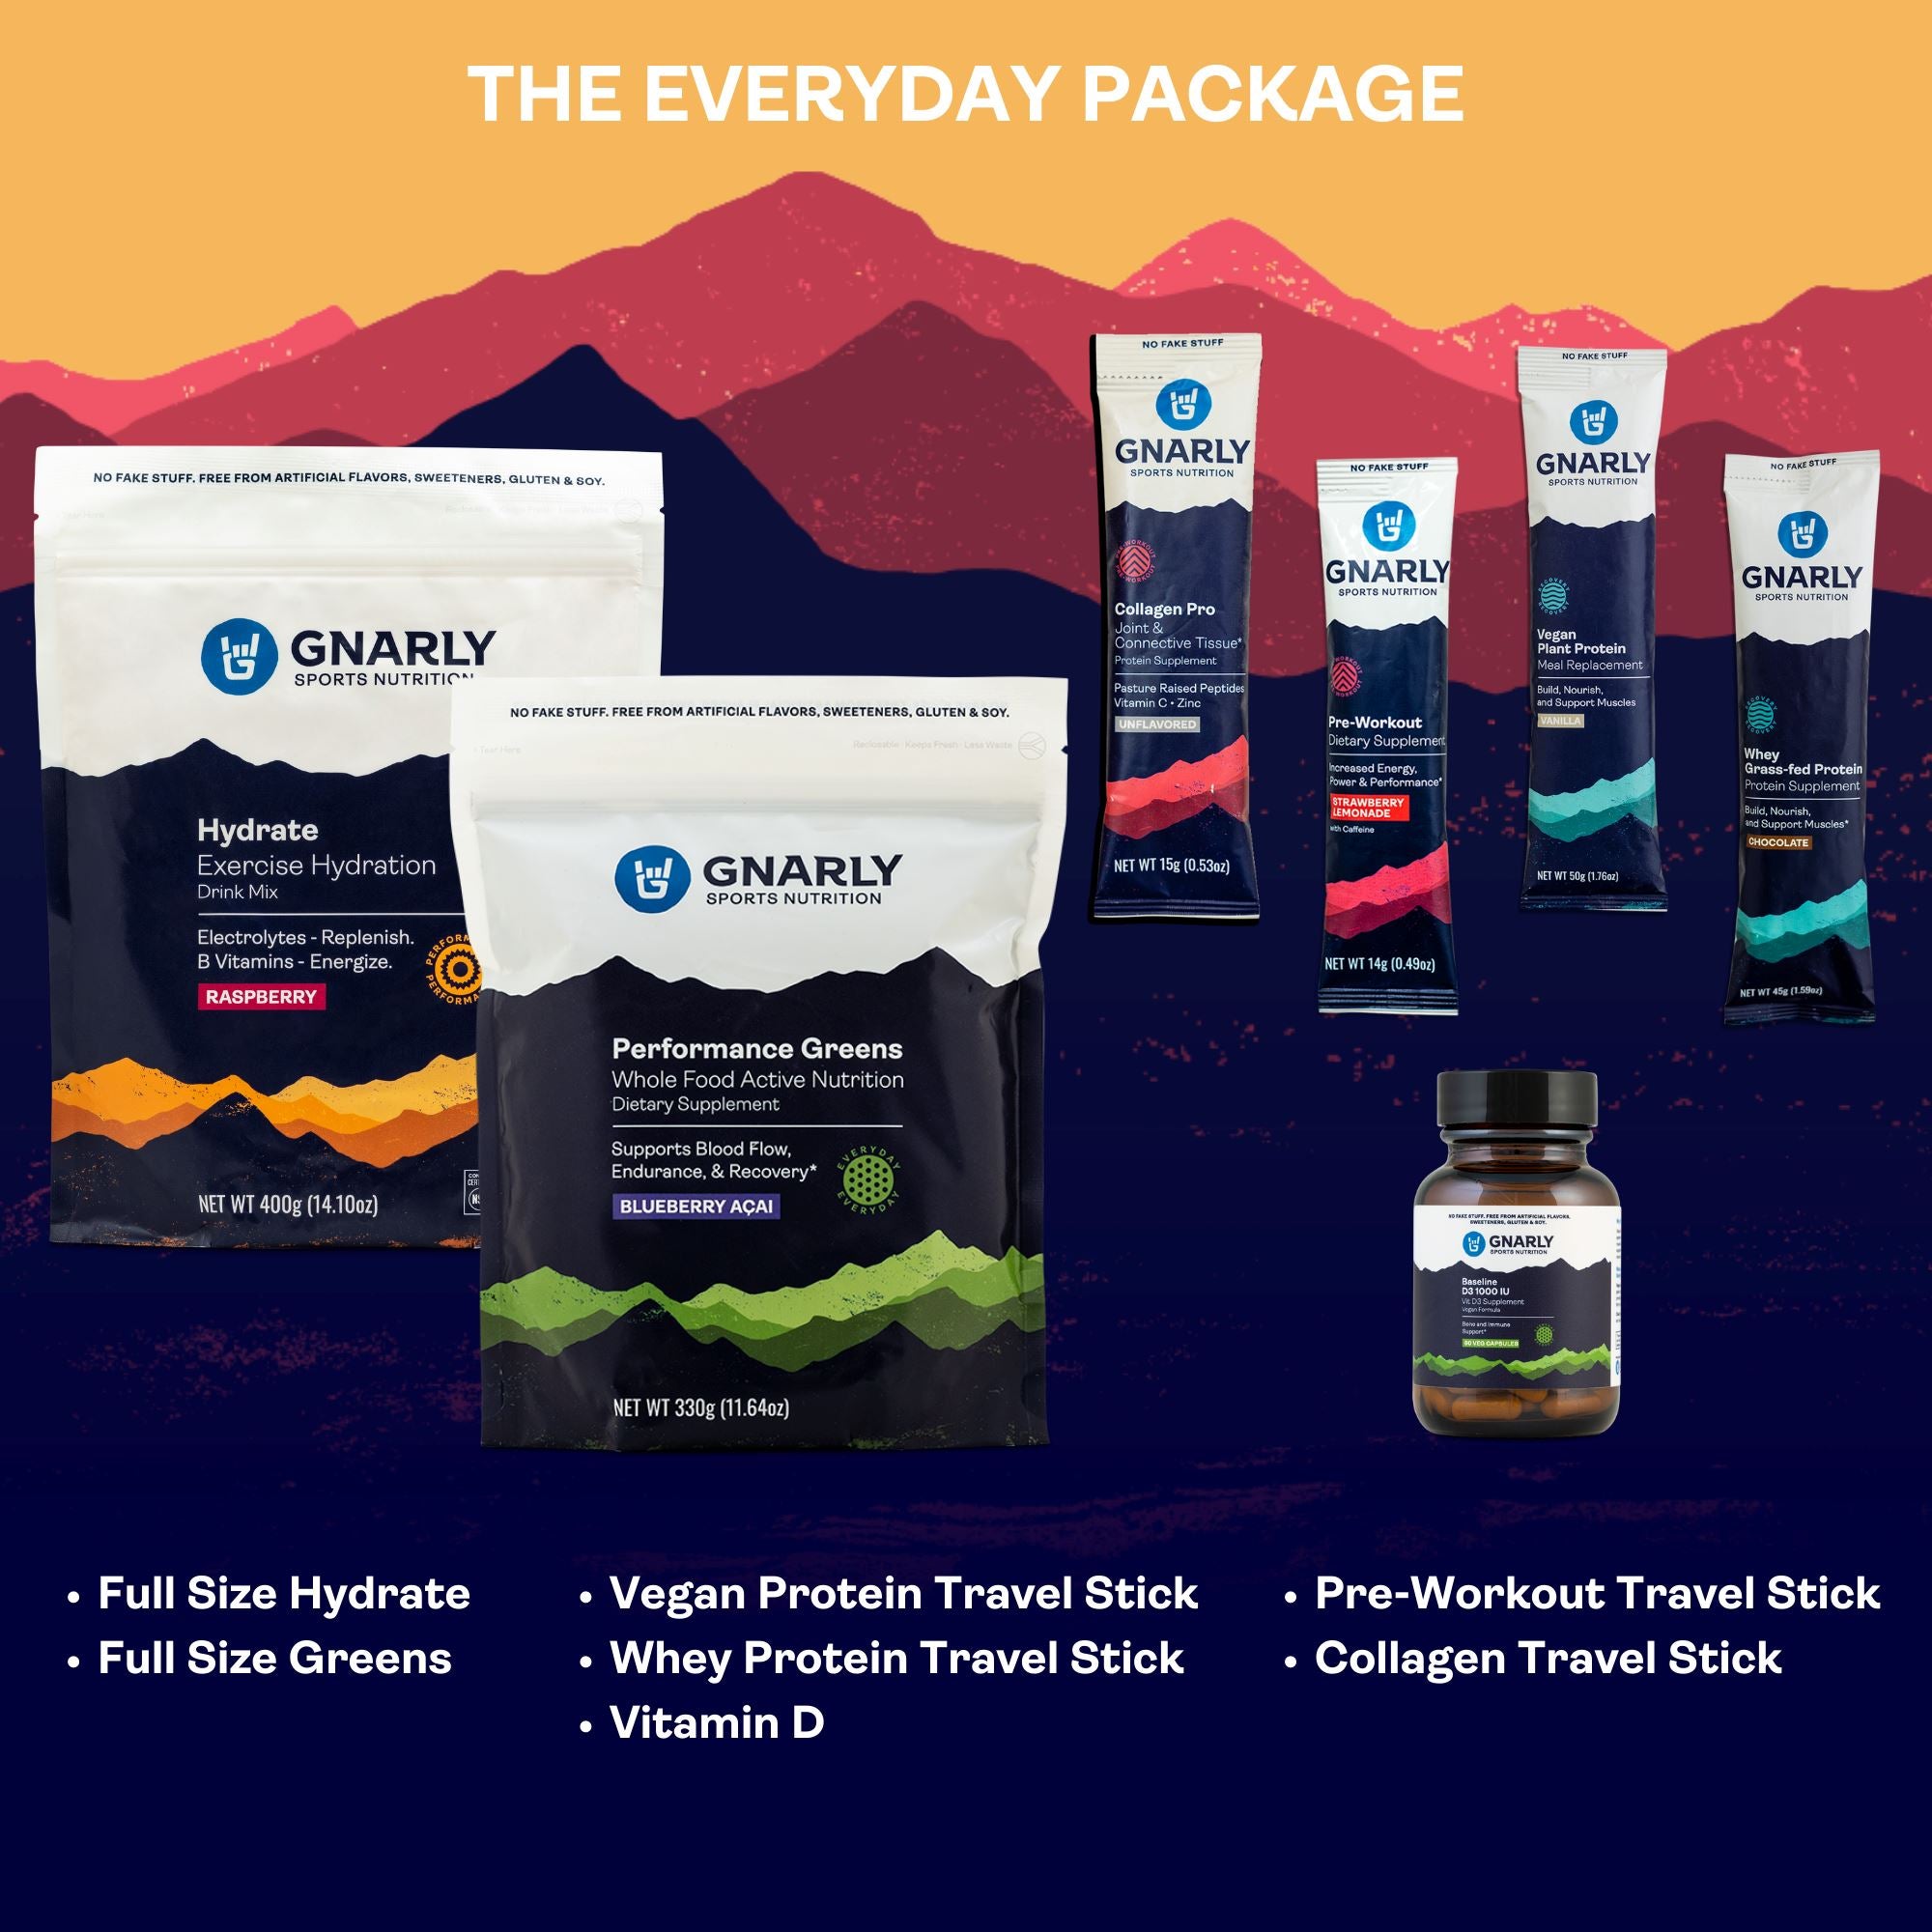 Free sports supplement samples